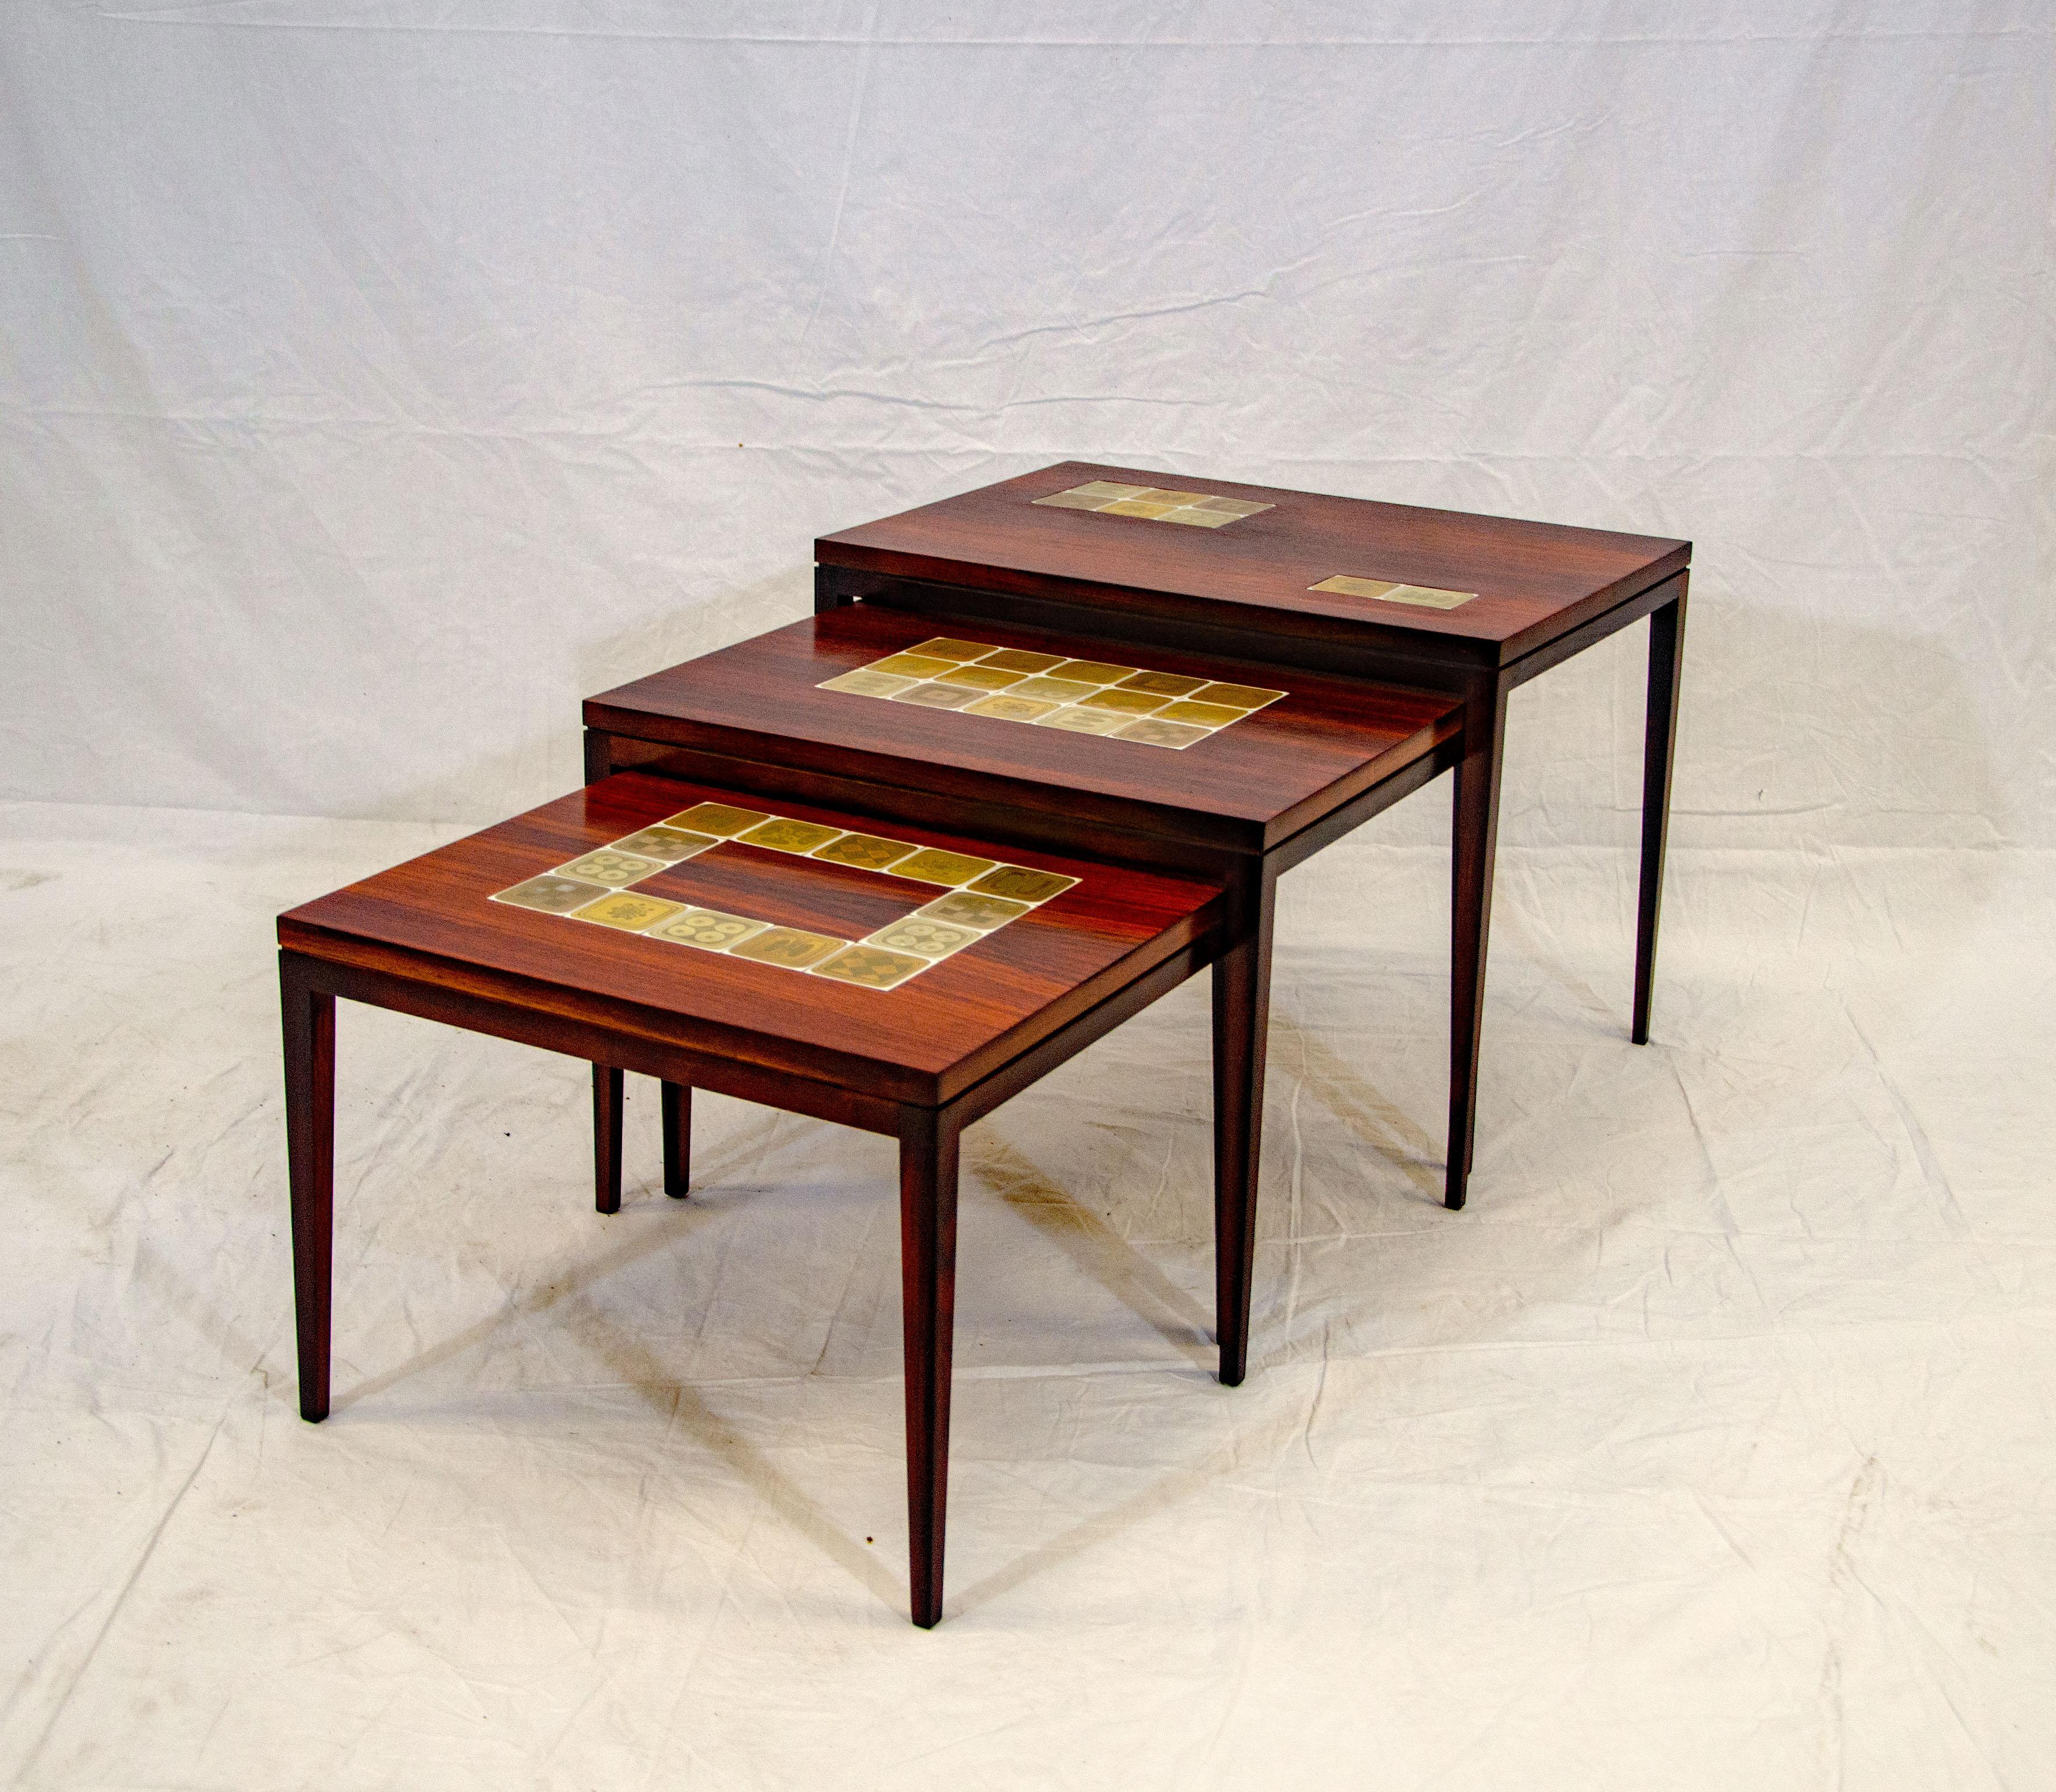 Set of Three Rosewood Nesting Tables, Rosenthal-Germany In Good Condition For Sale In Crockett, CA